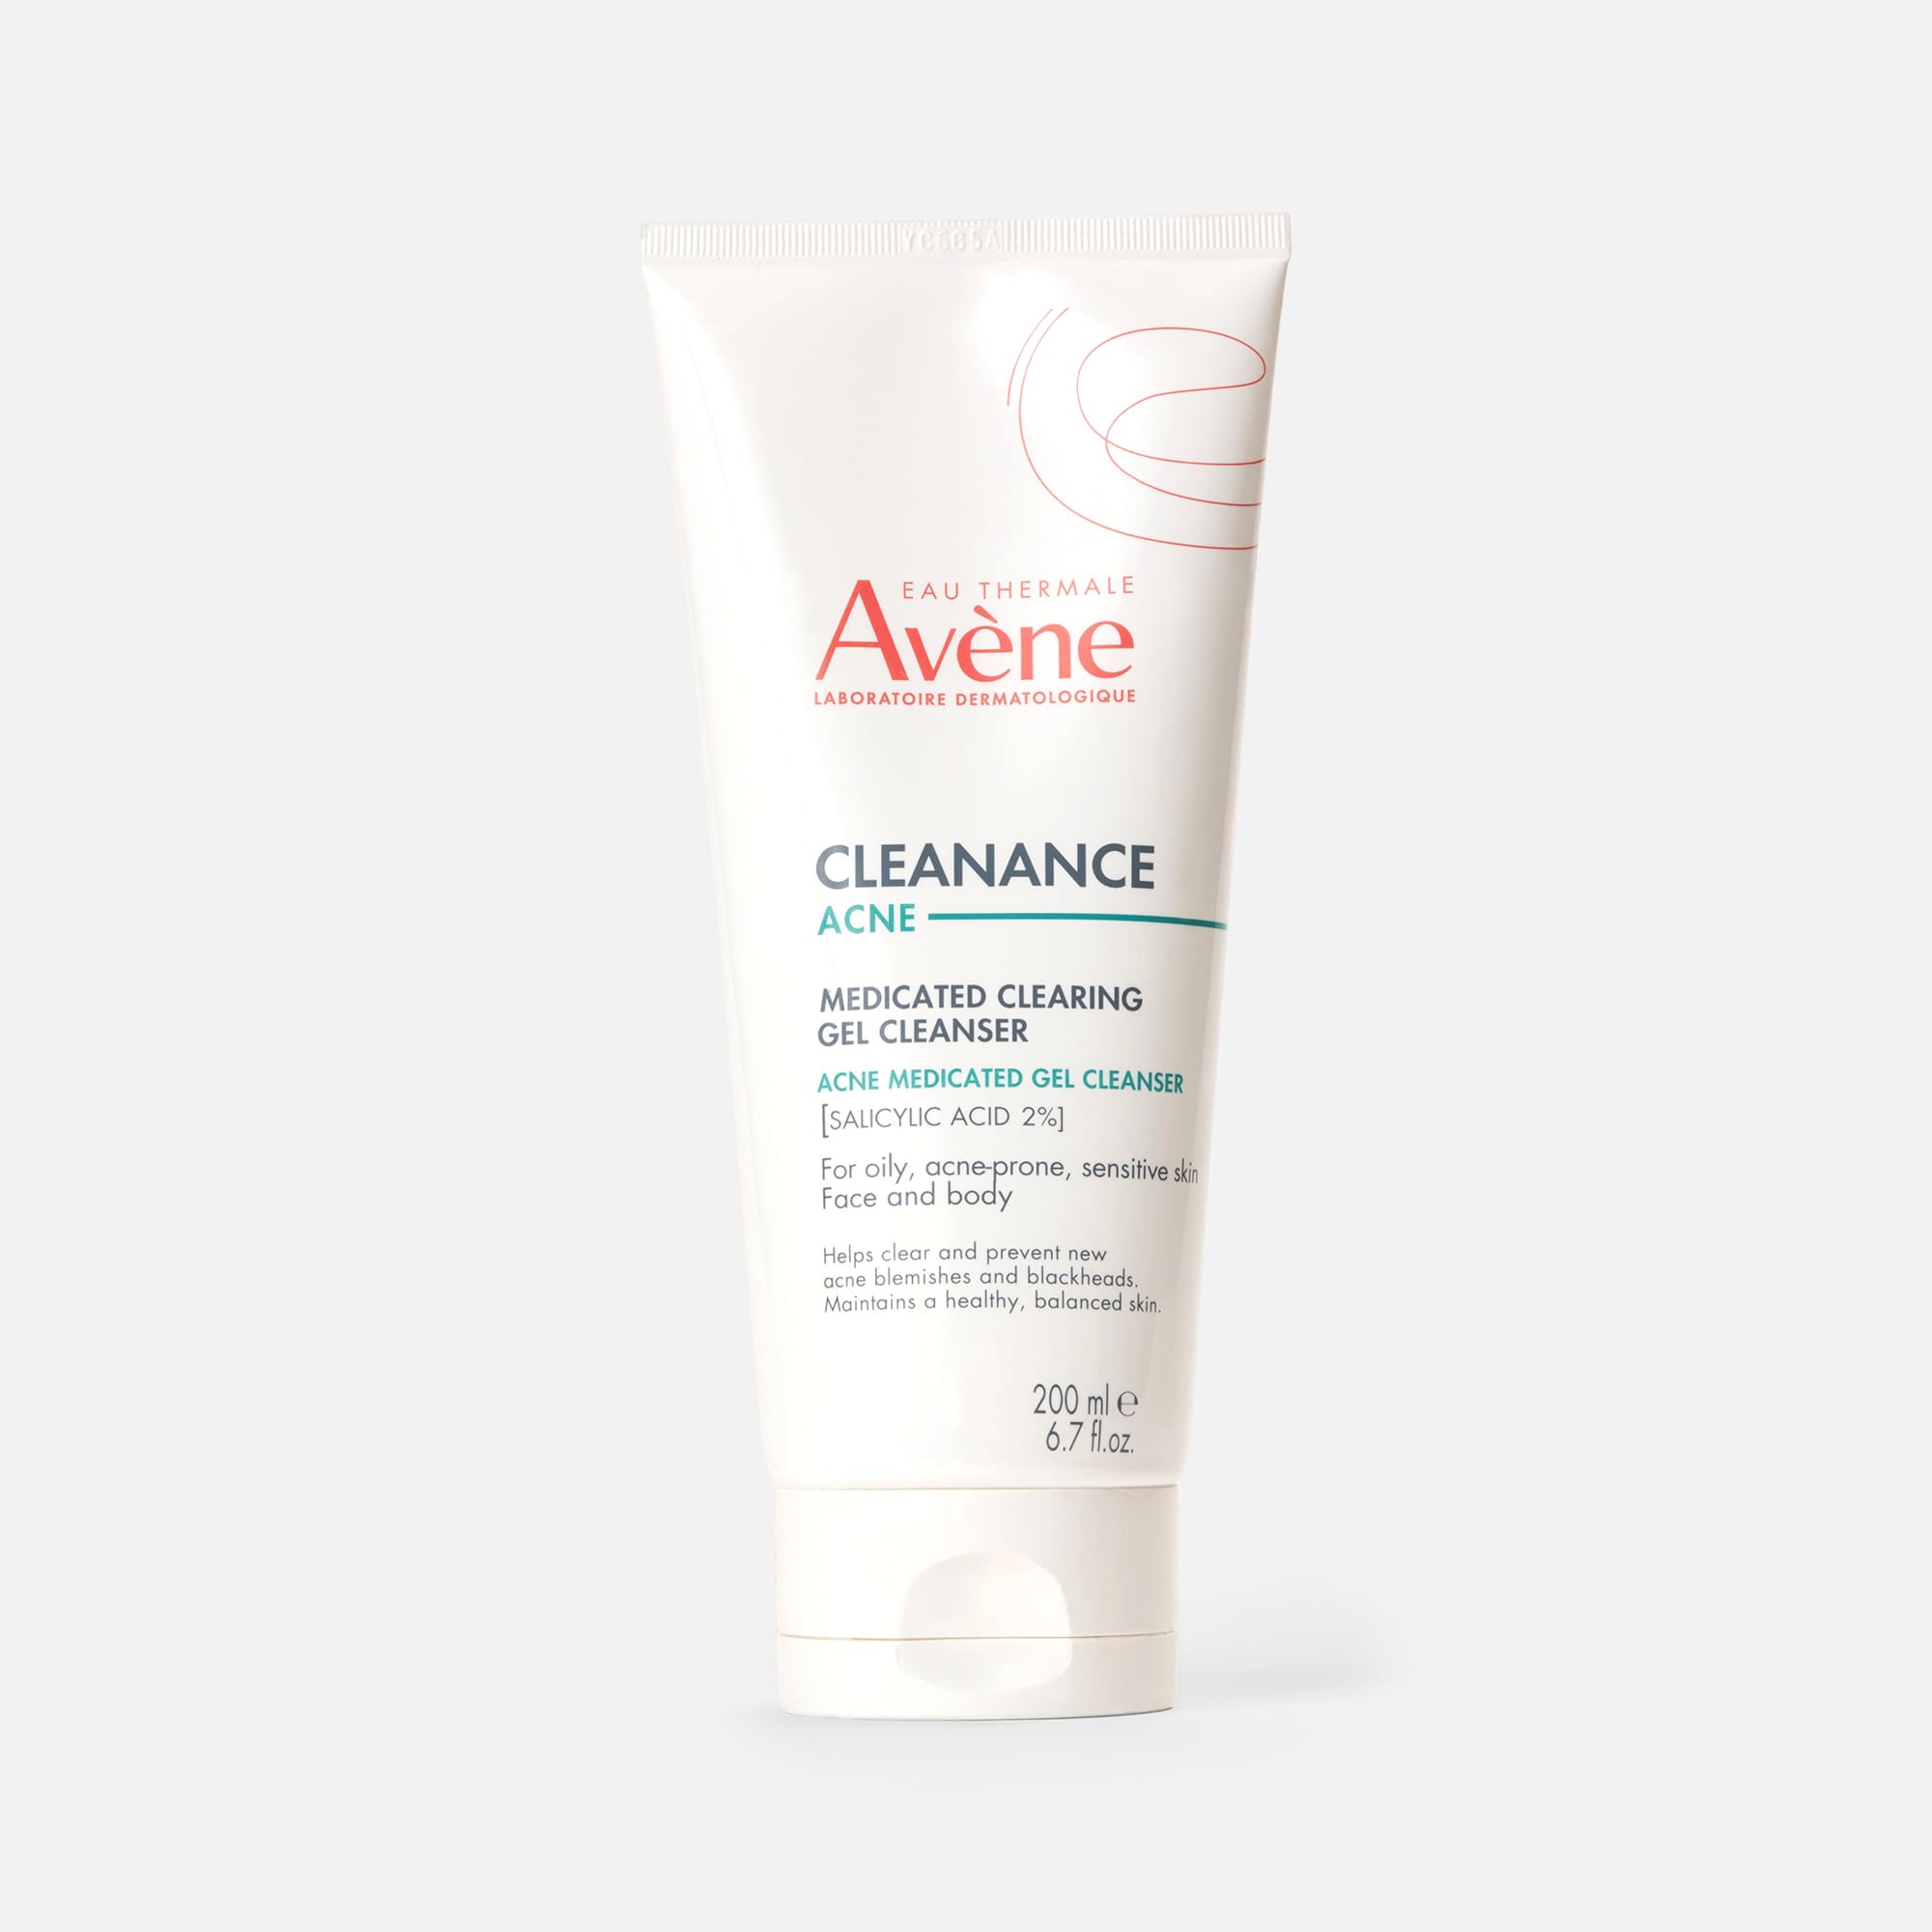 Avene outsmarts acne with Cleanance Expert